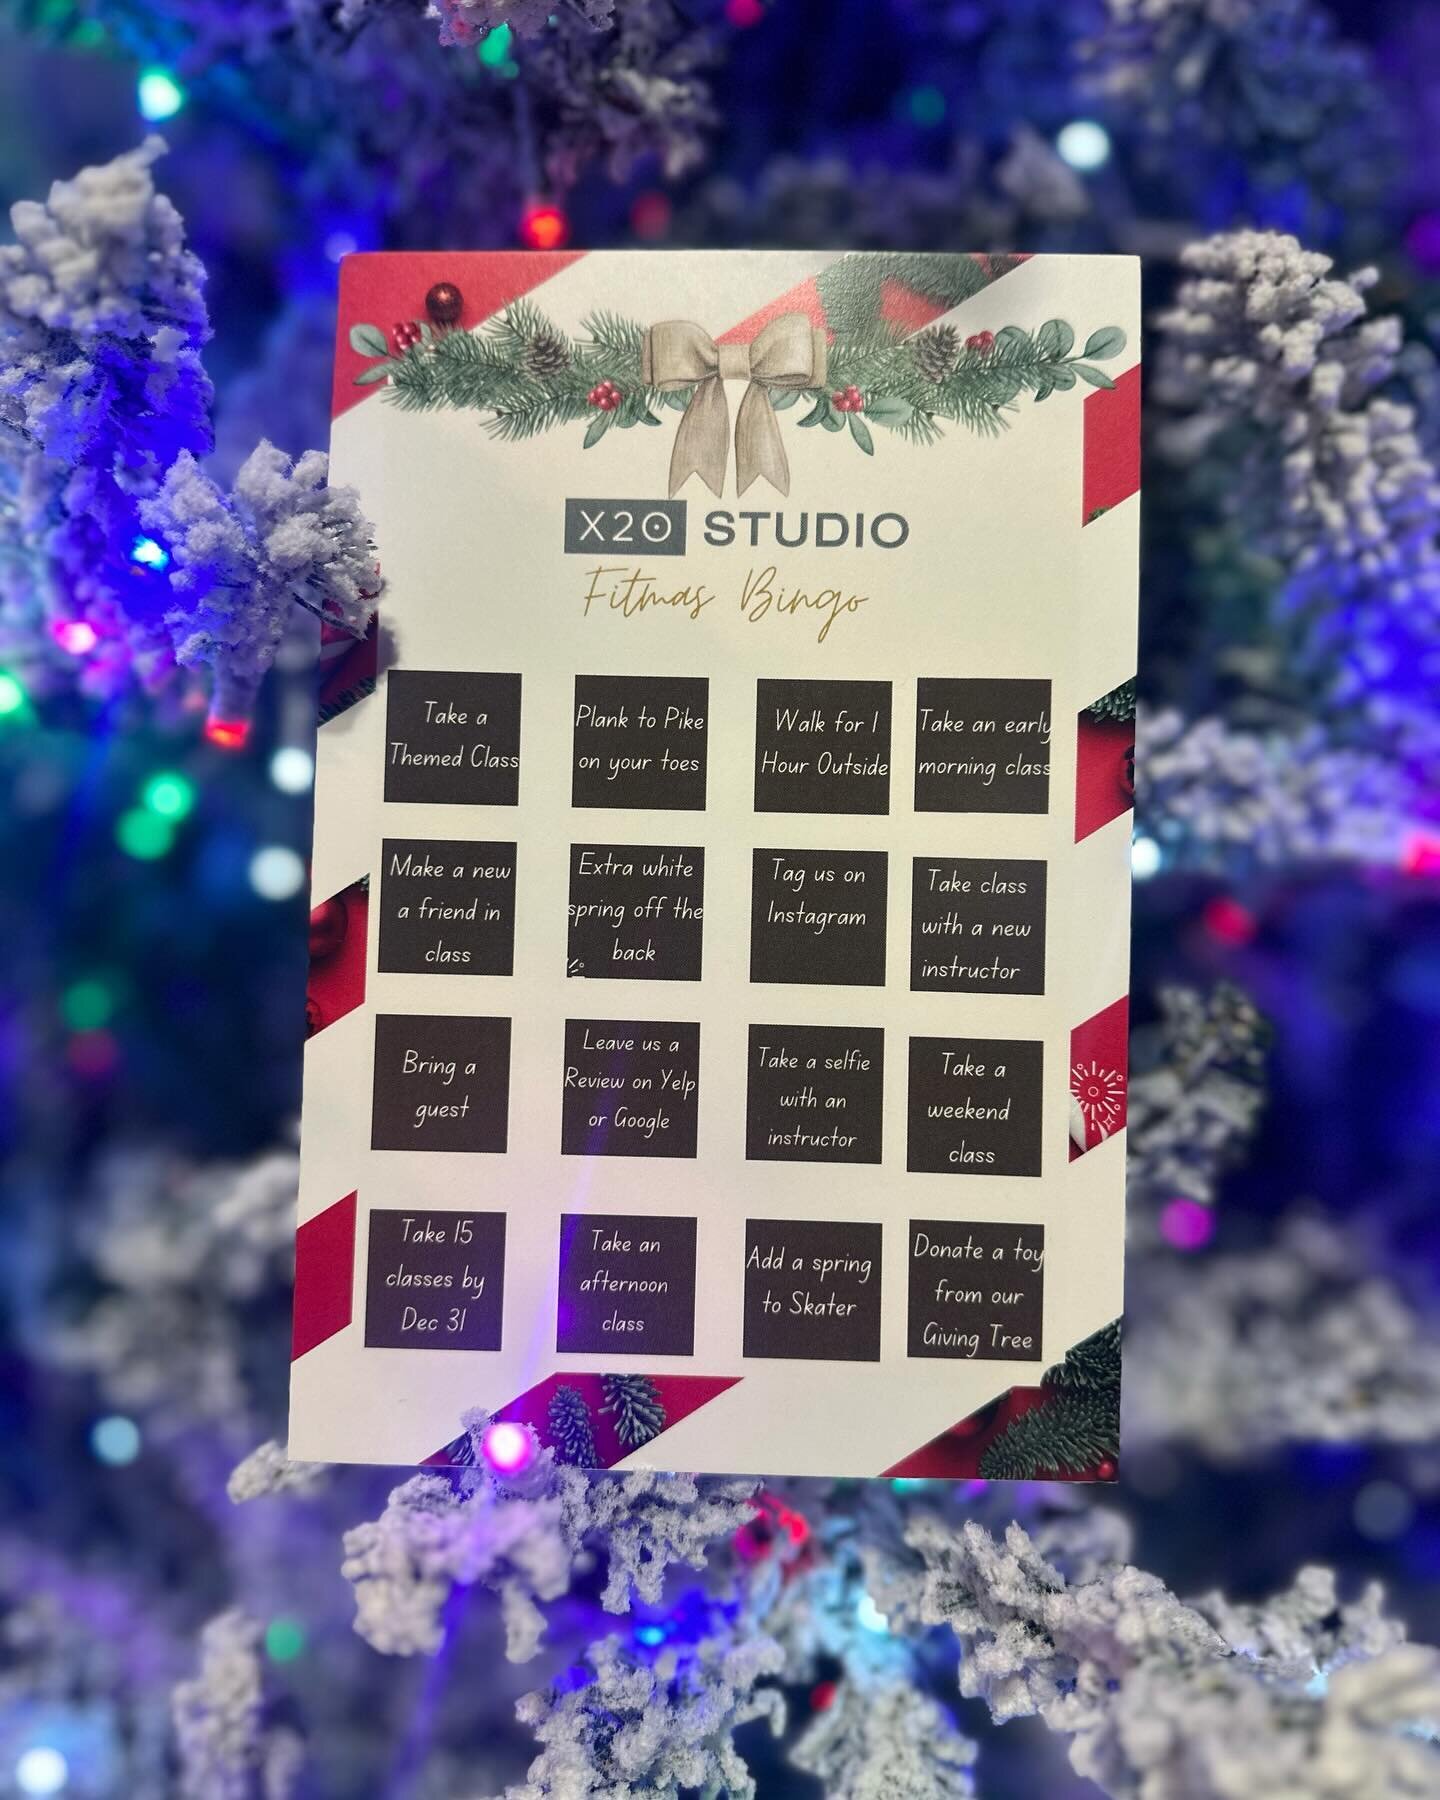 Back by popular demand, it&rsquo;s FITMAS Season again at X2o!
Cards will be available at the front desk of both studios starting Tuesday, Dec 5th!

Grab your card and complete all the squares by Dec 31st.
In studio challenges will require an instruc